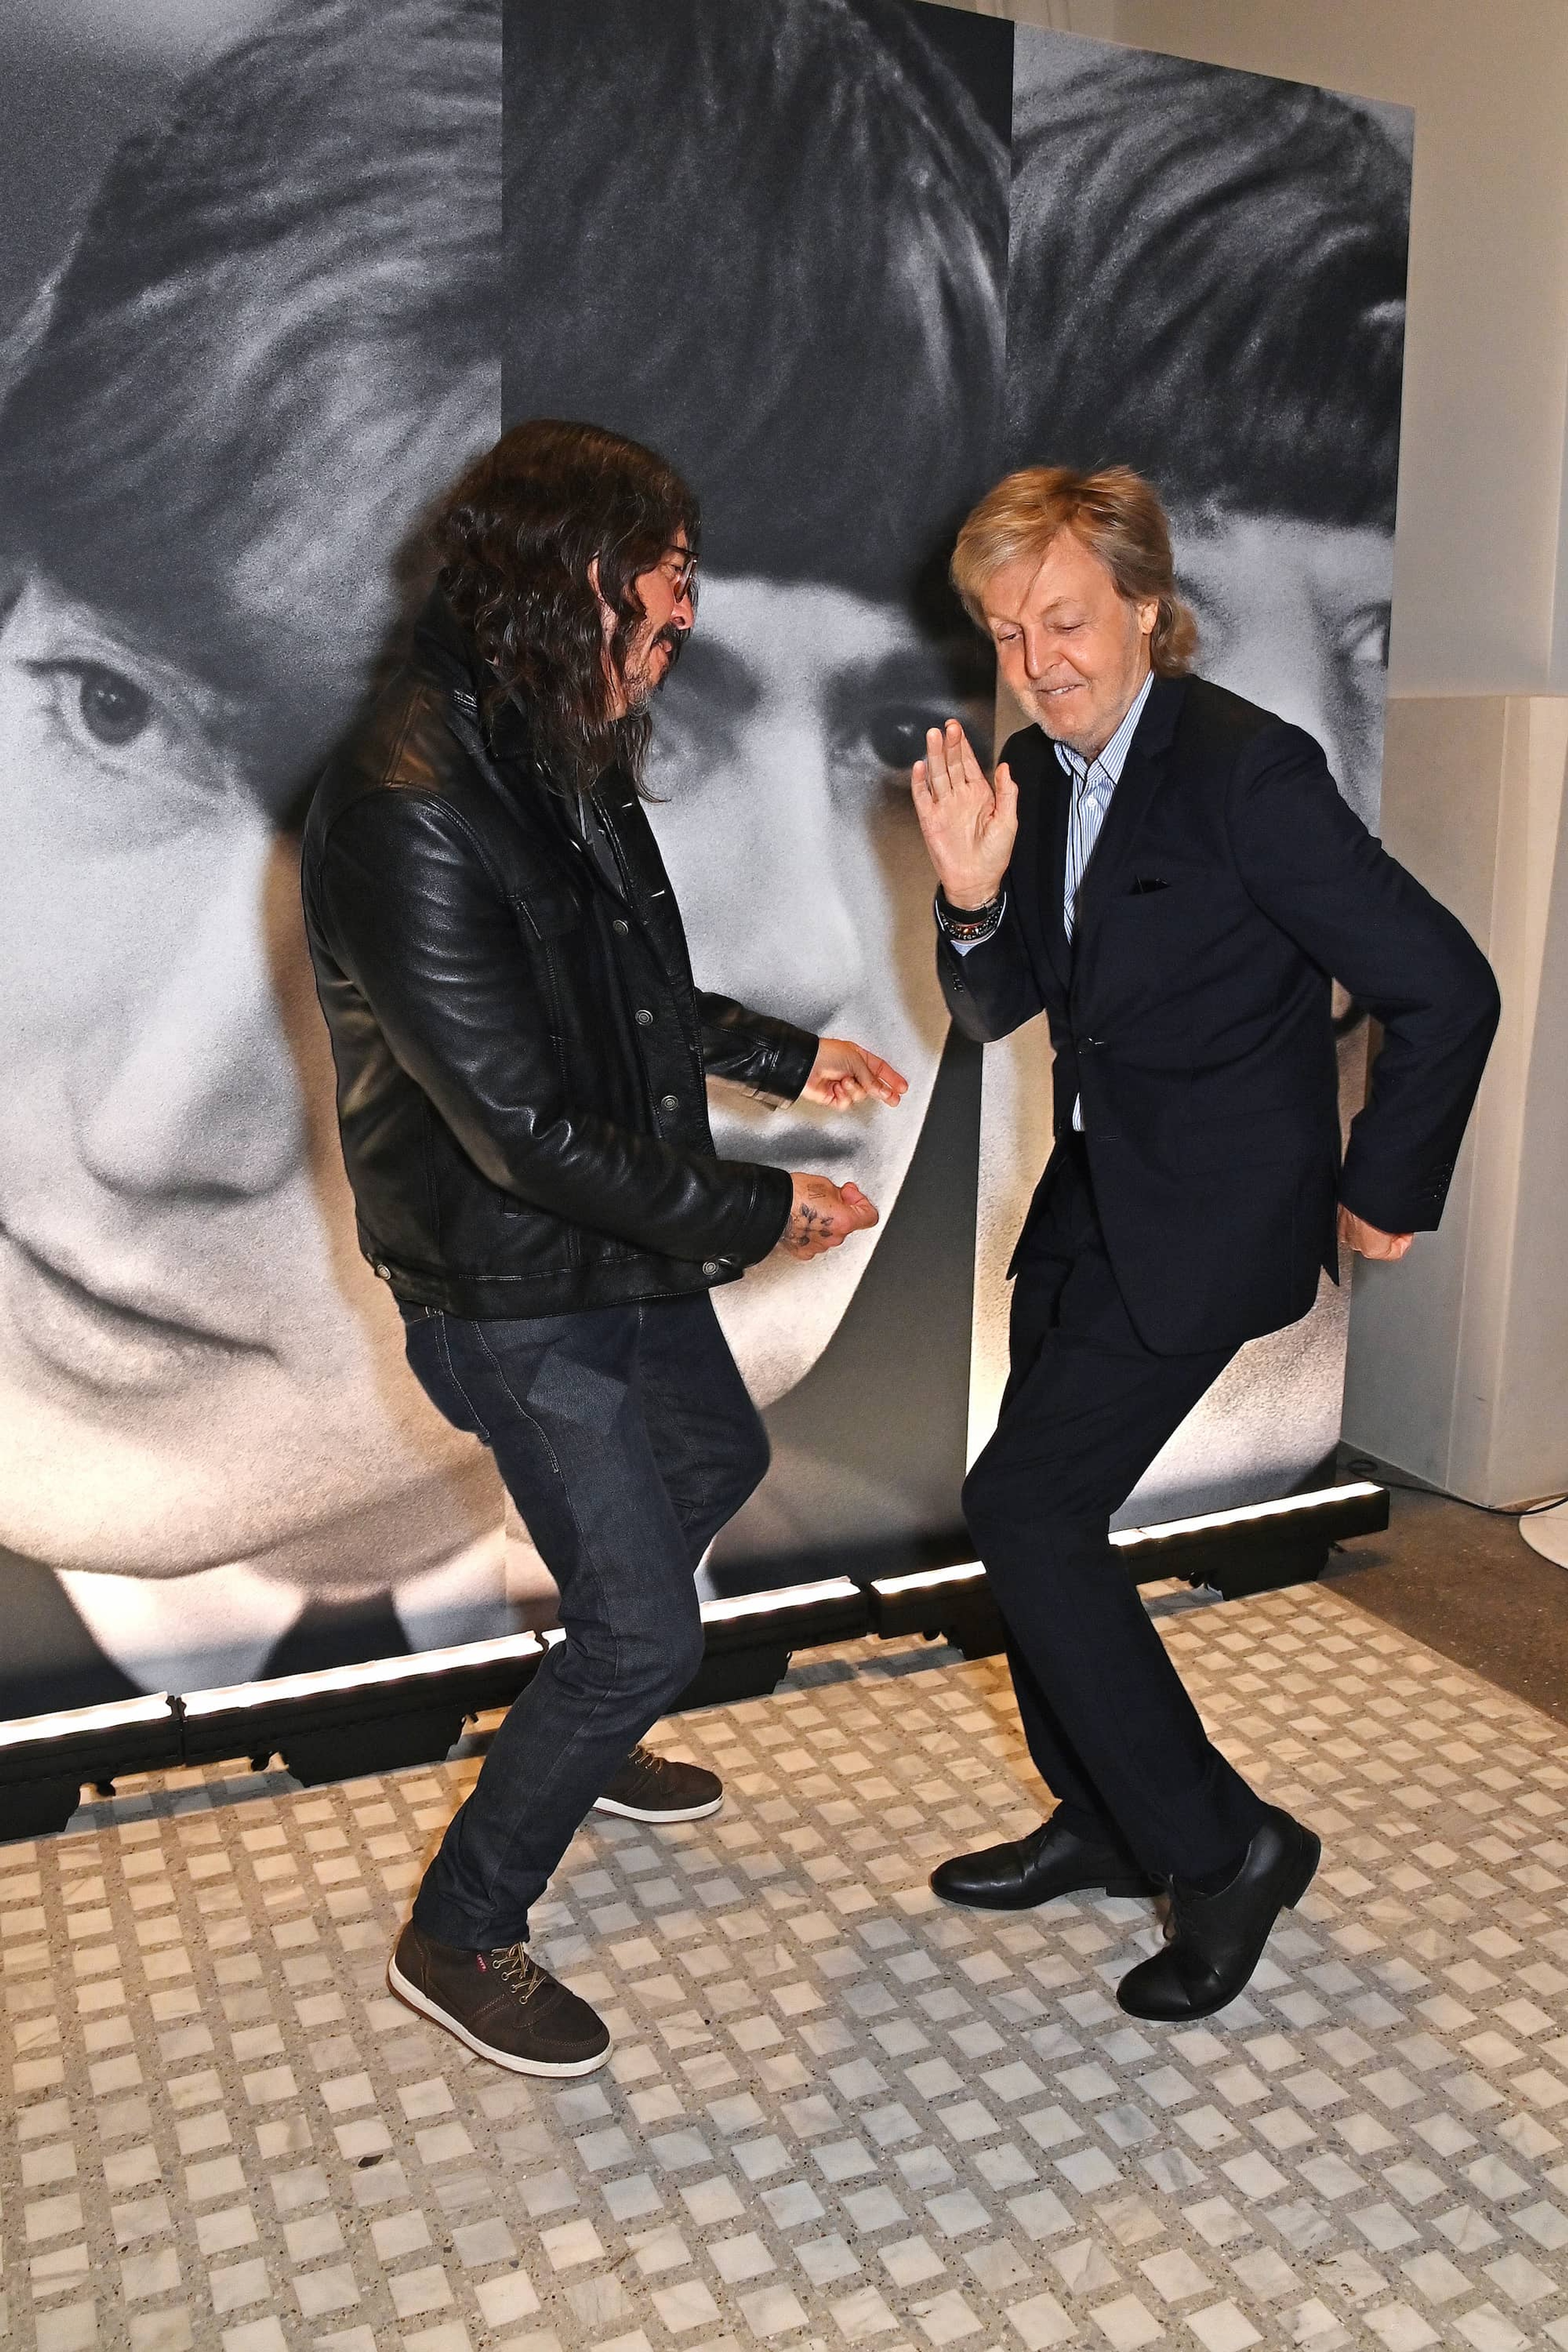 Photograph of Paul McCartney and Dave Grohl at the opening preview night of Paul's exhibition at the National Portrait Gallery